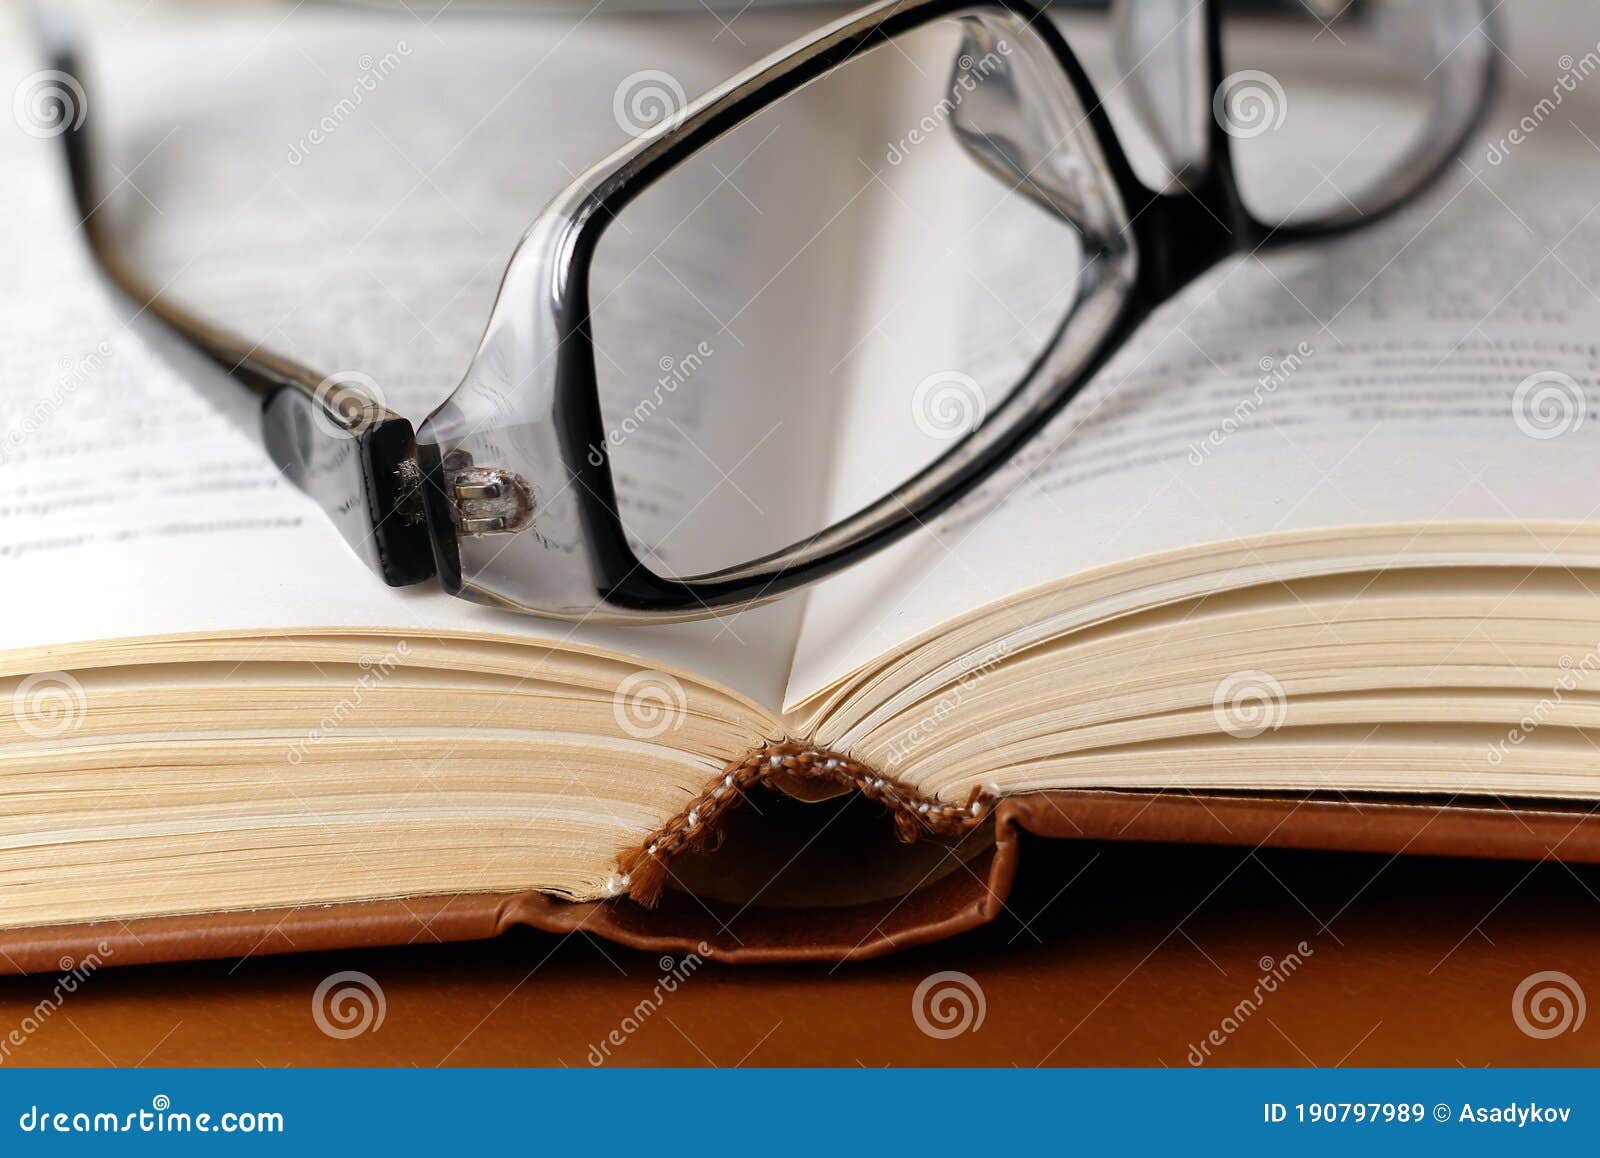 eyeglasses on open harcover book